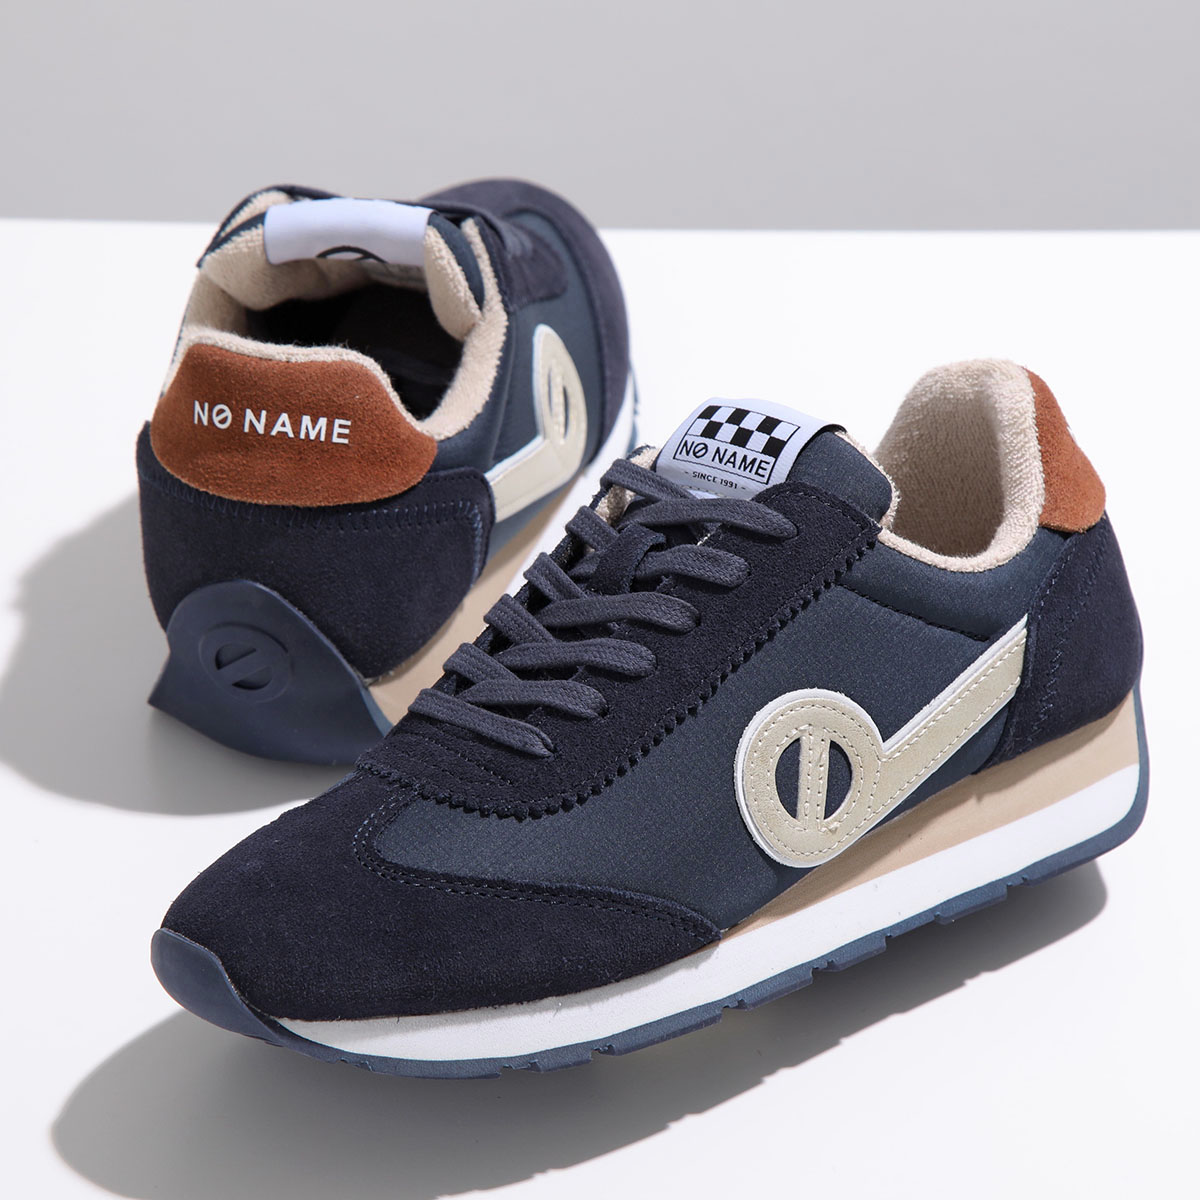 NO NAME ノーネーム スニーカー CITY RUN JOGGER SUEDE SQUARE レ...